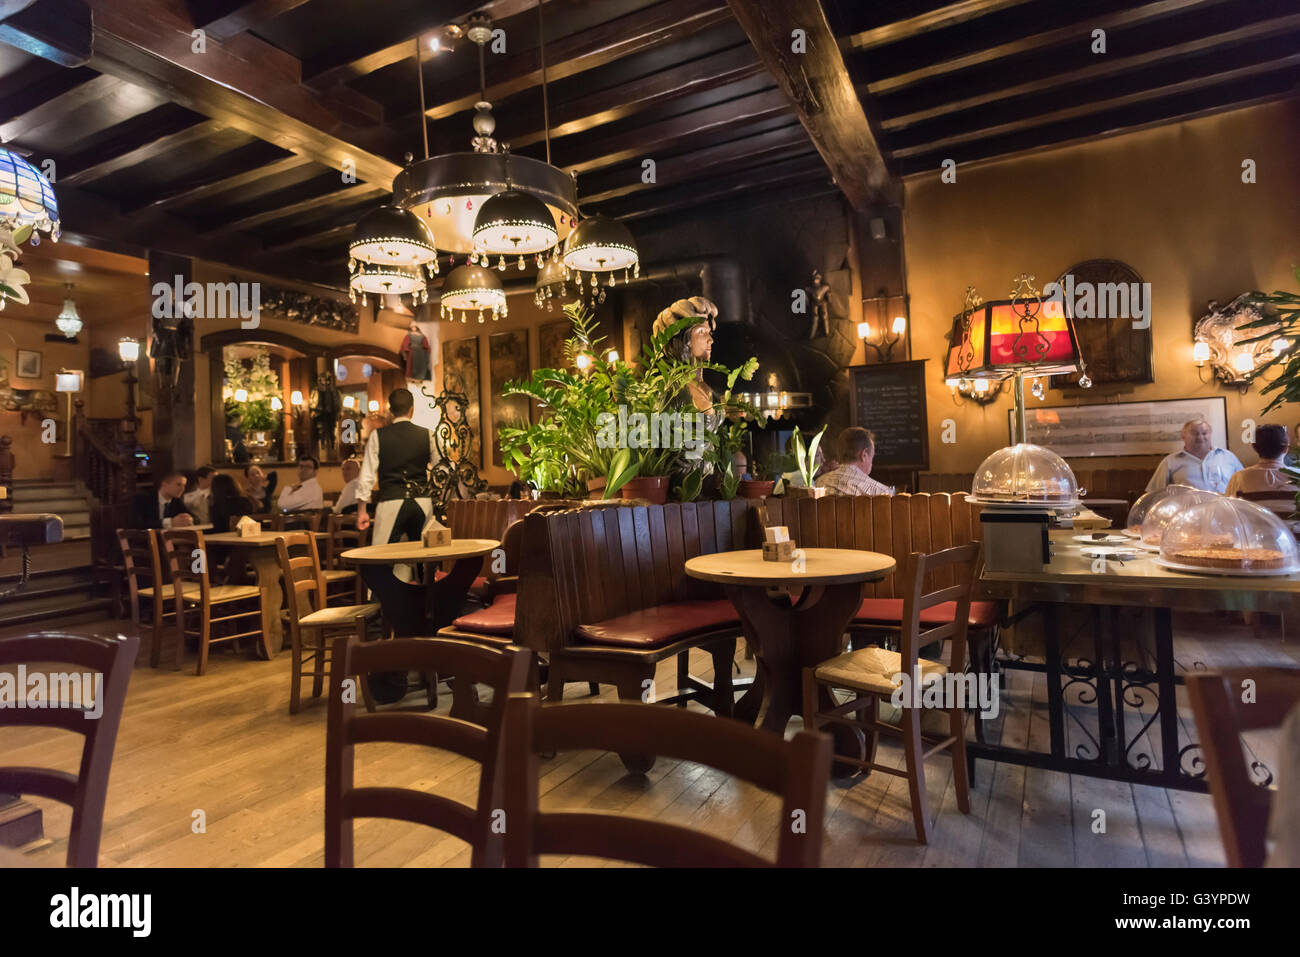 La Chaloupe d’or brasserie interior Grand Place Brussels Belgium Stock Photo